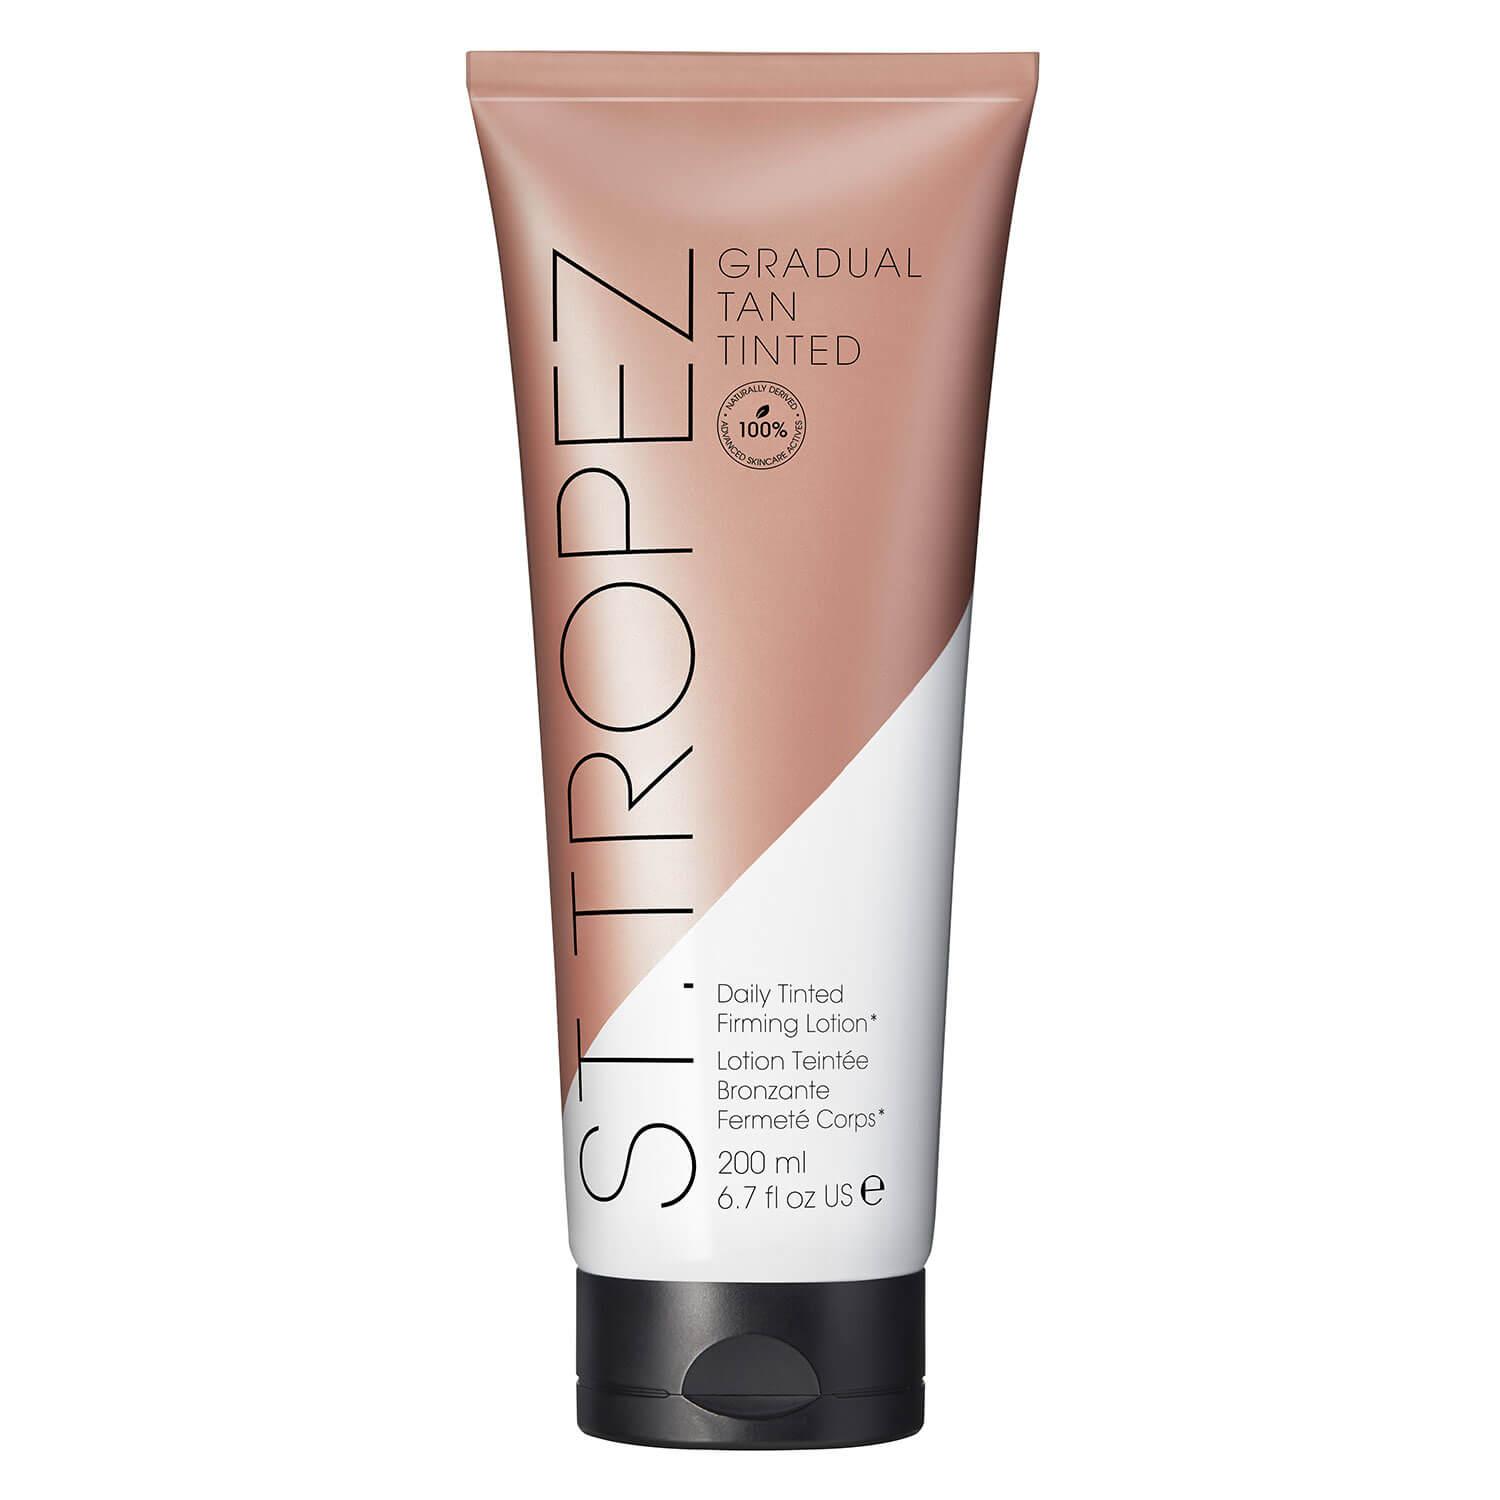 St.Tropez - Gradual Tan Tinted Daily Tinted Firming Lotion